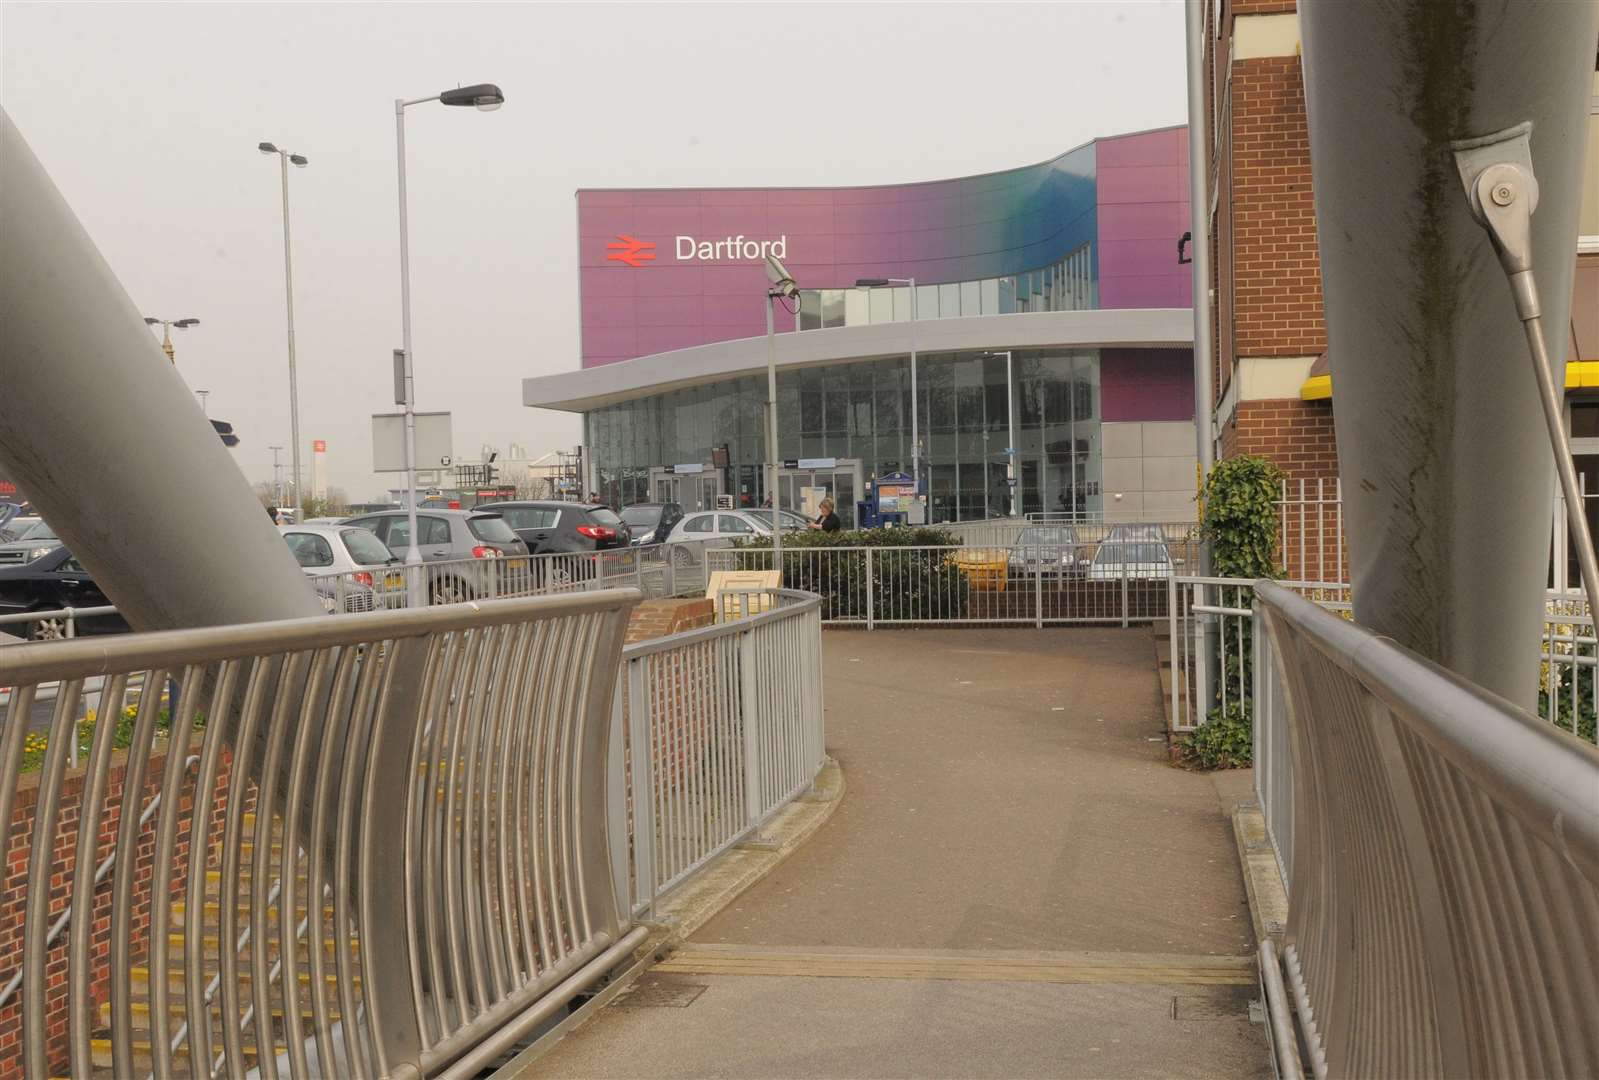 Dartford Train station would require an upgrade if a Crossrail extension was approved. Picture: Steve Crispe.